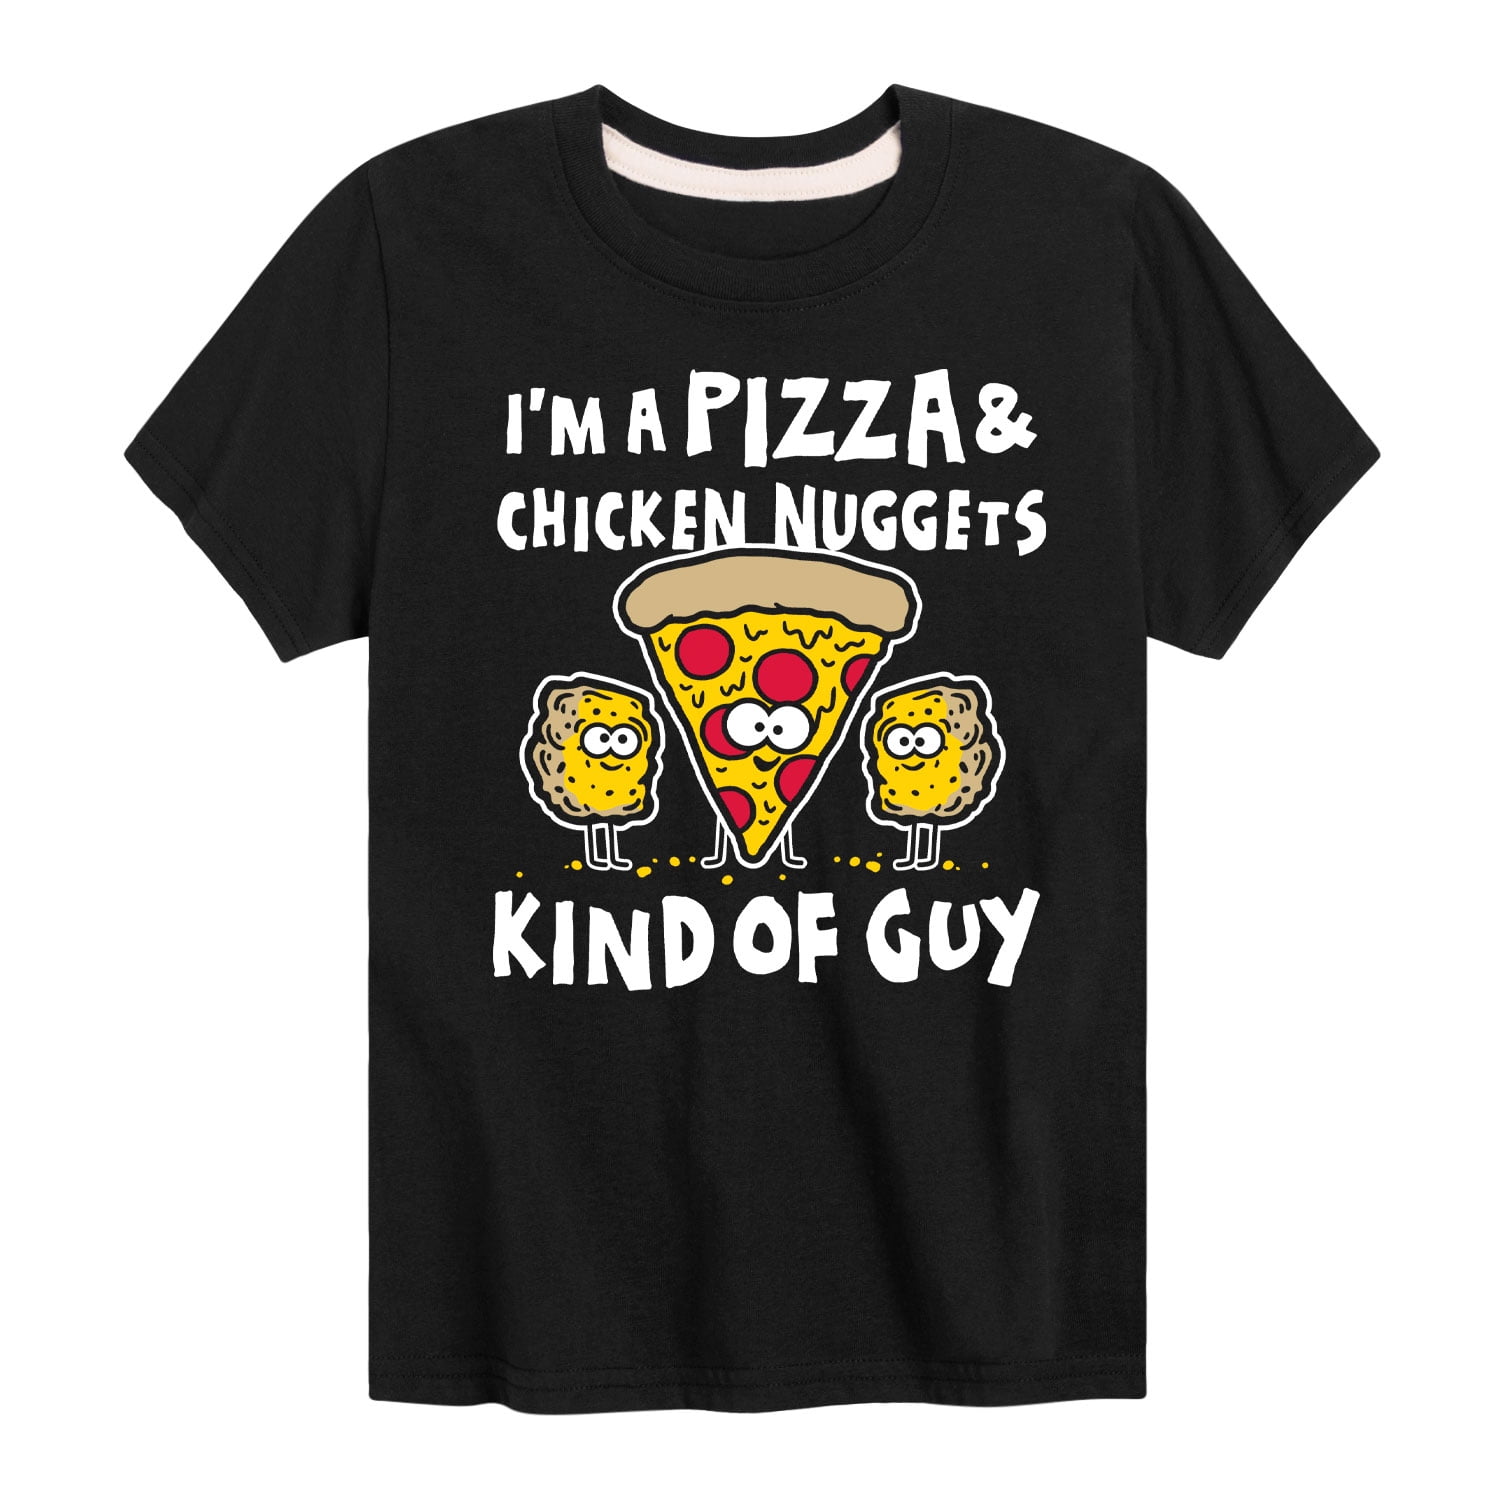 Kid's Food Tee Shirt Funny Pizza Tee Shirt Pizza Tshirts Funny Chicken Nugget Shirt I'm A Pizza And Chicken Nugget Kind Of Guy